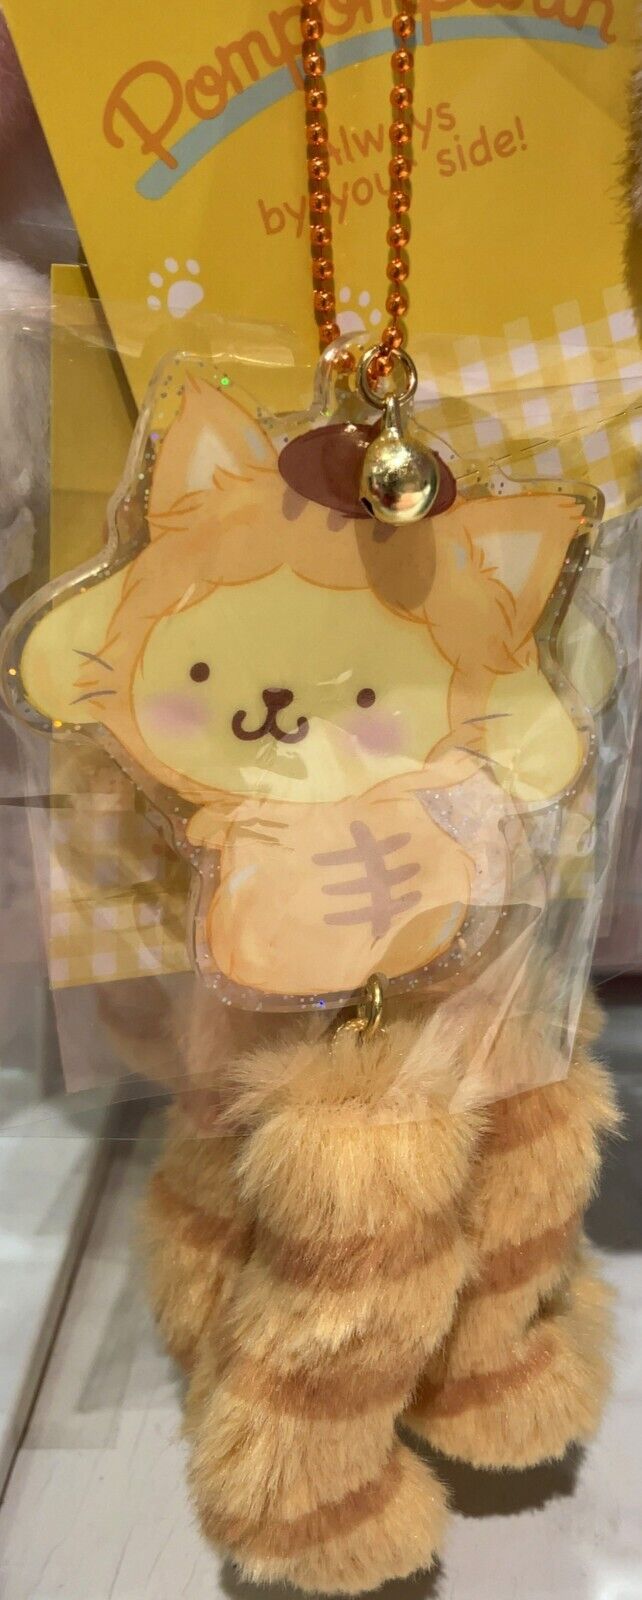 Sanrio Character Pompompurin Acrylic Charm With Tail (Love Cat Cat) Keychain New